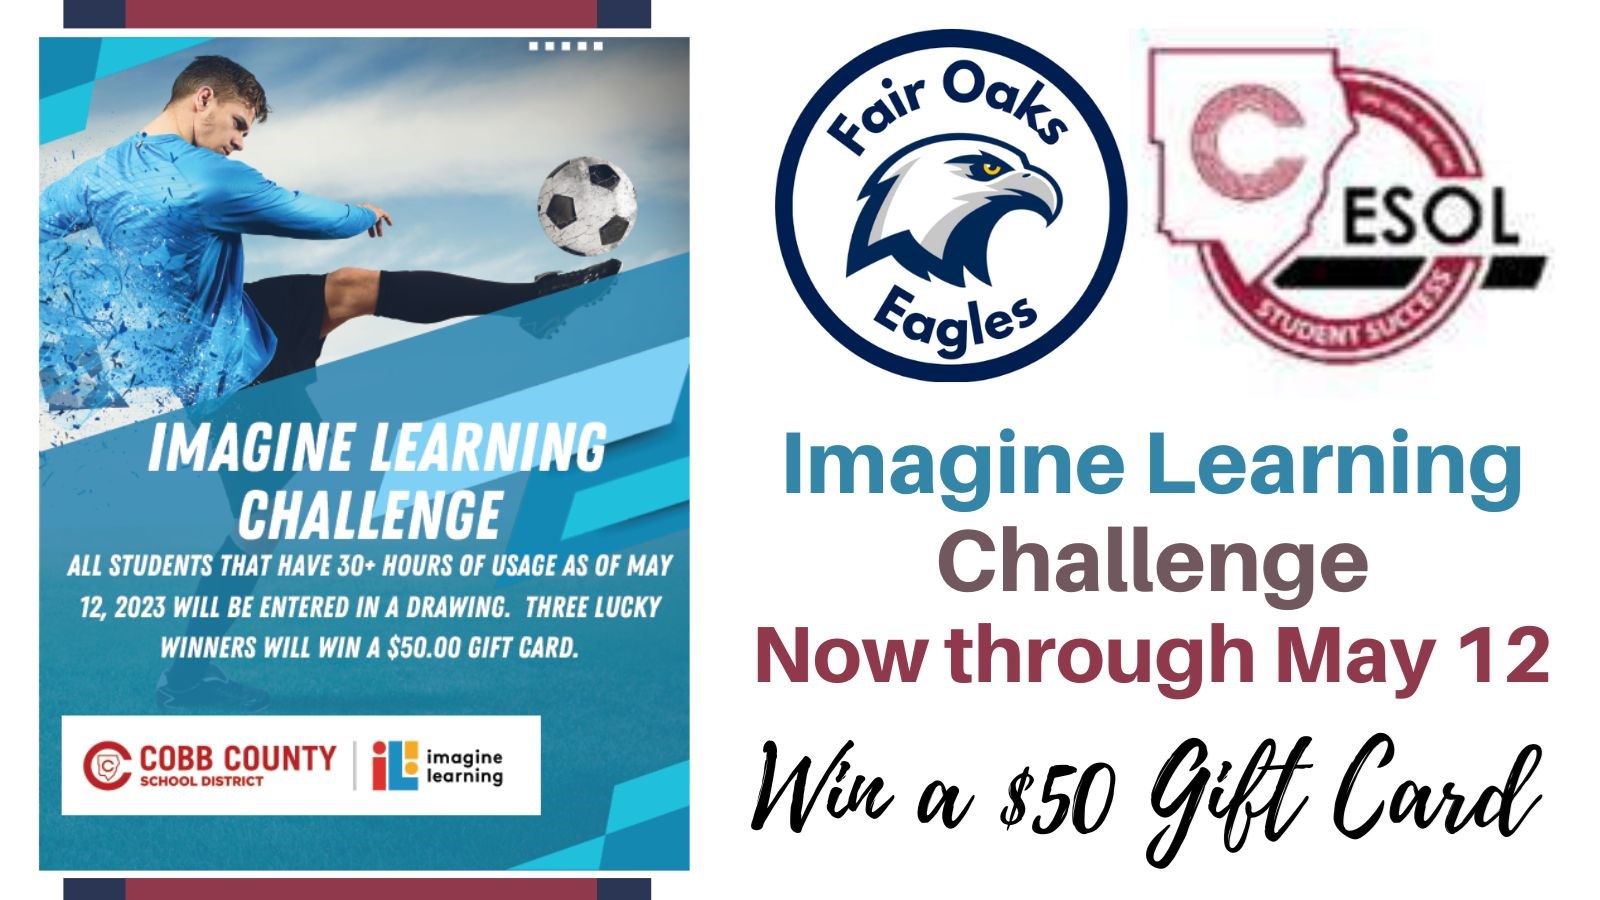 Imagine Learning Challenge through May 12